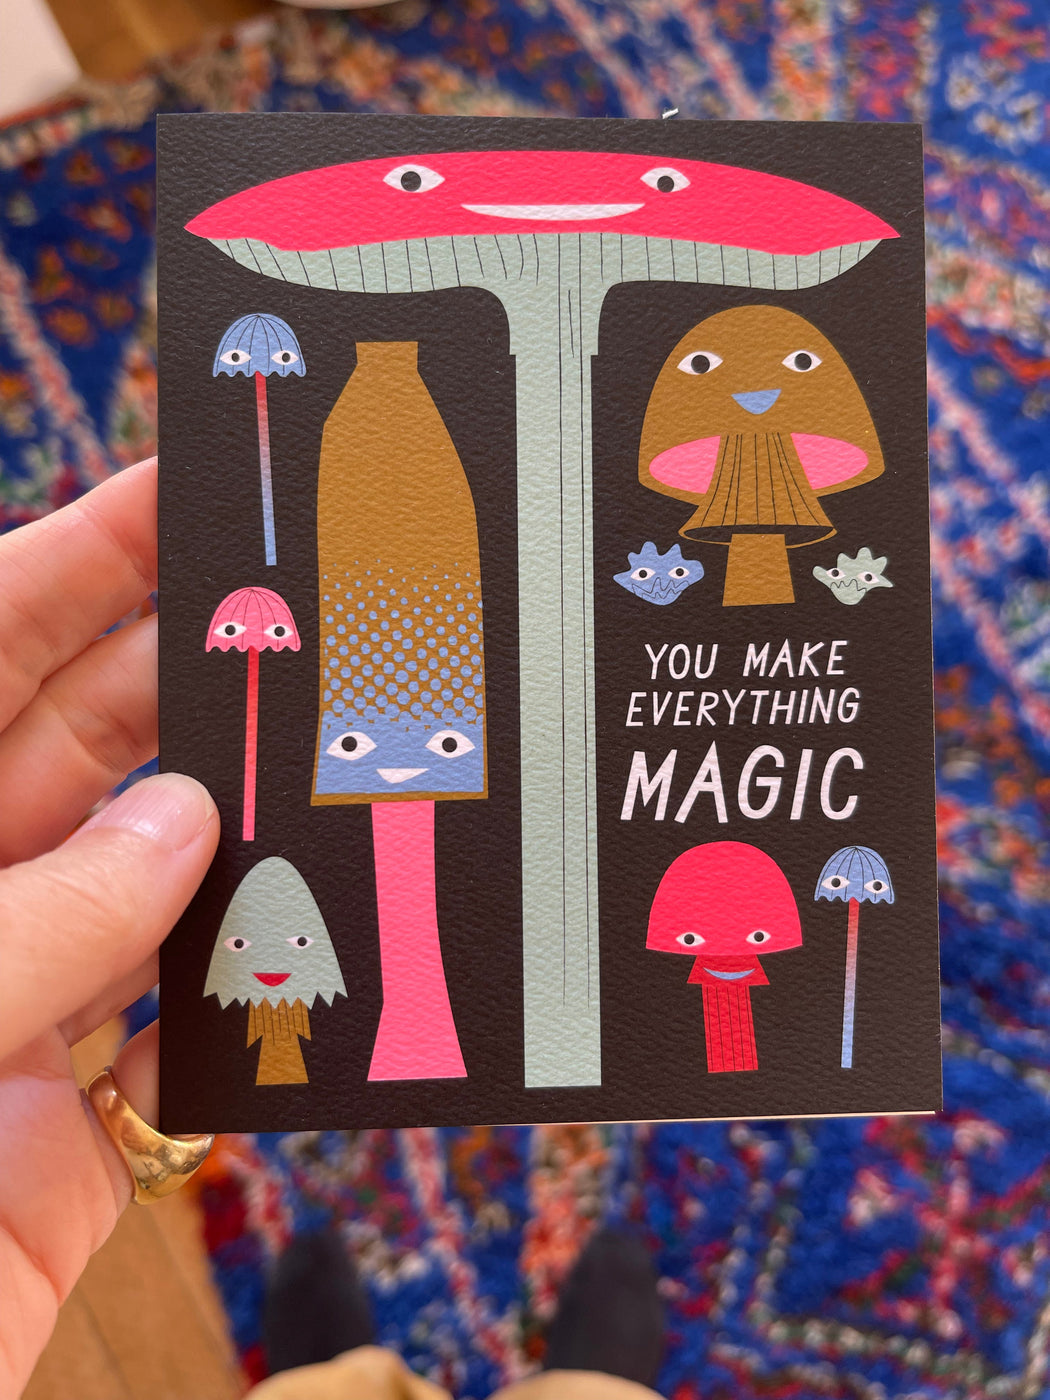 A special note cards with a crowd of fungi with grinning faces and the greeting "You Make Everything Magic"